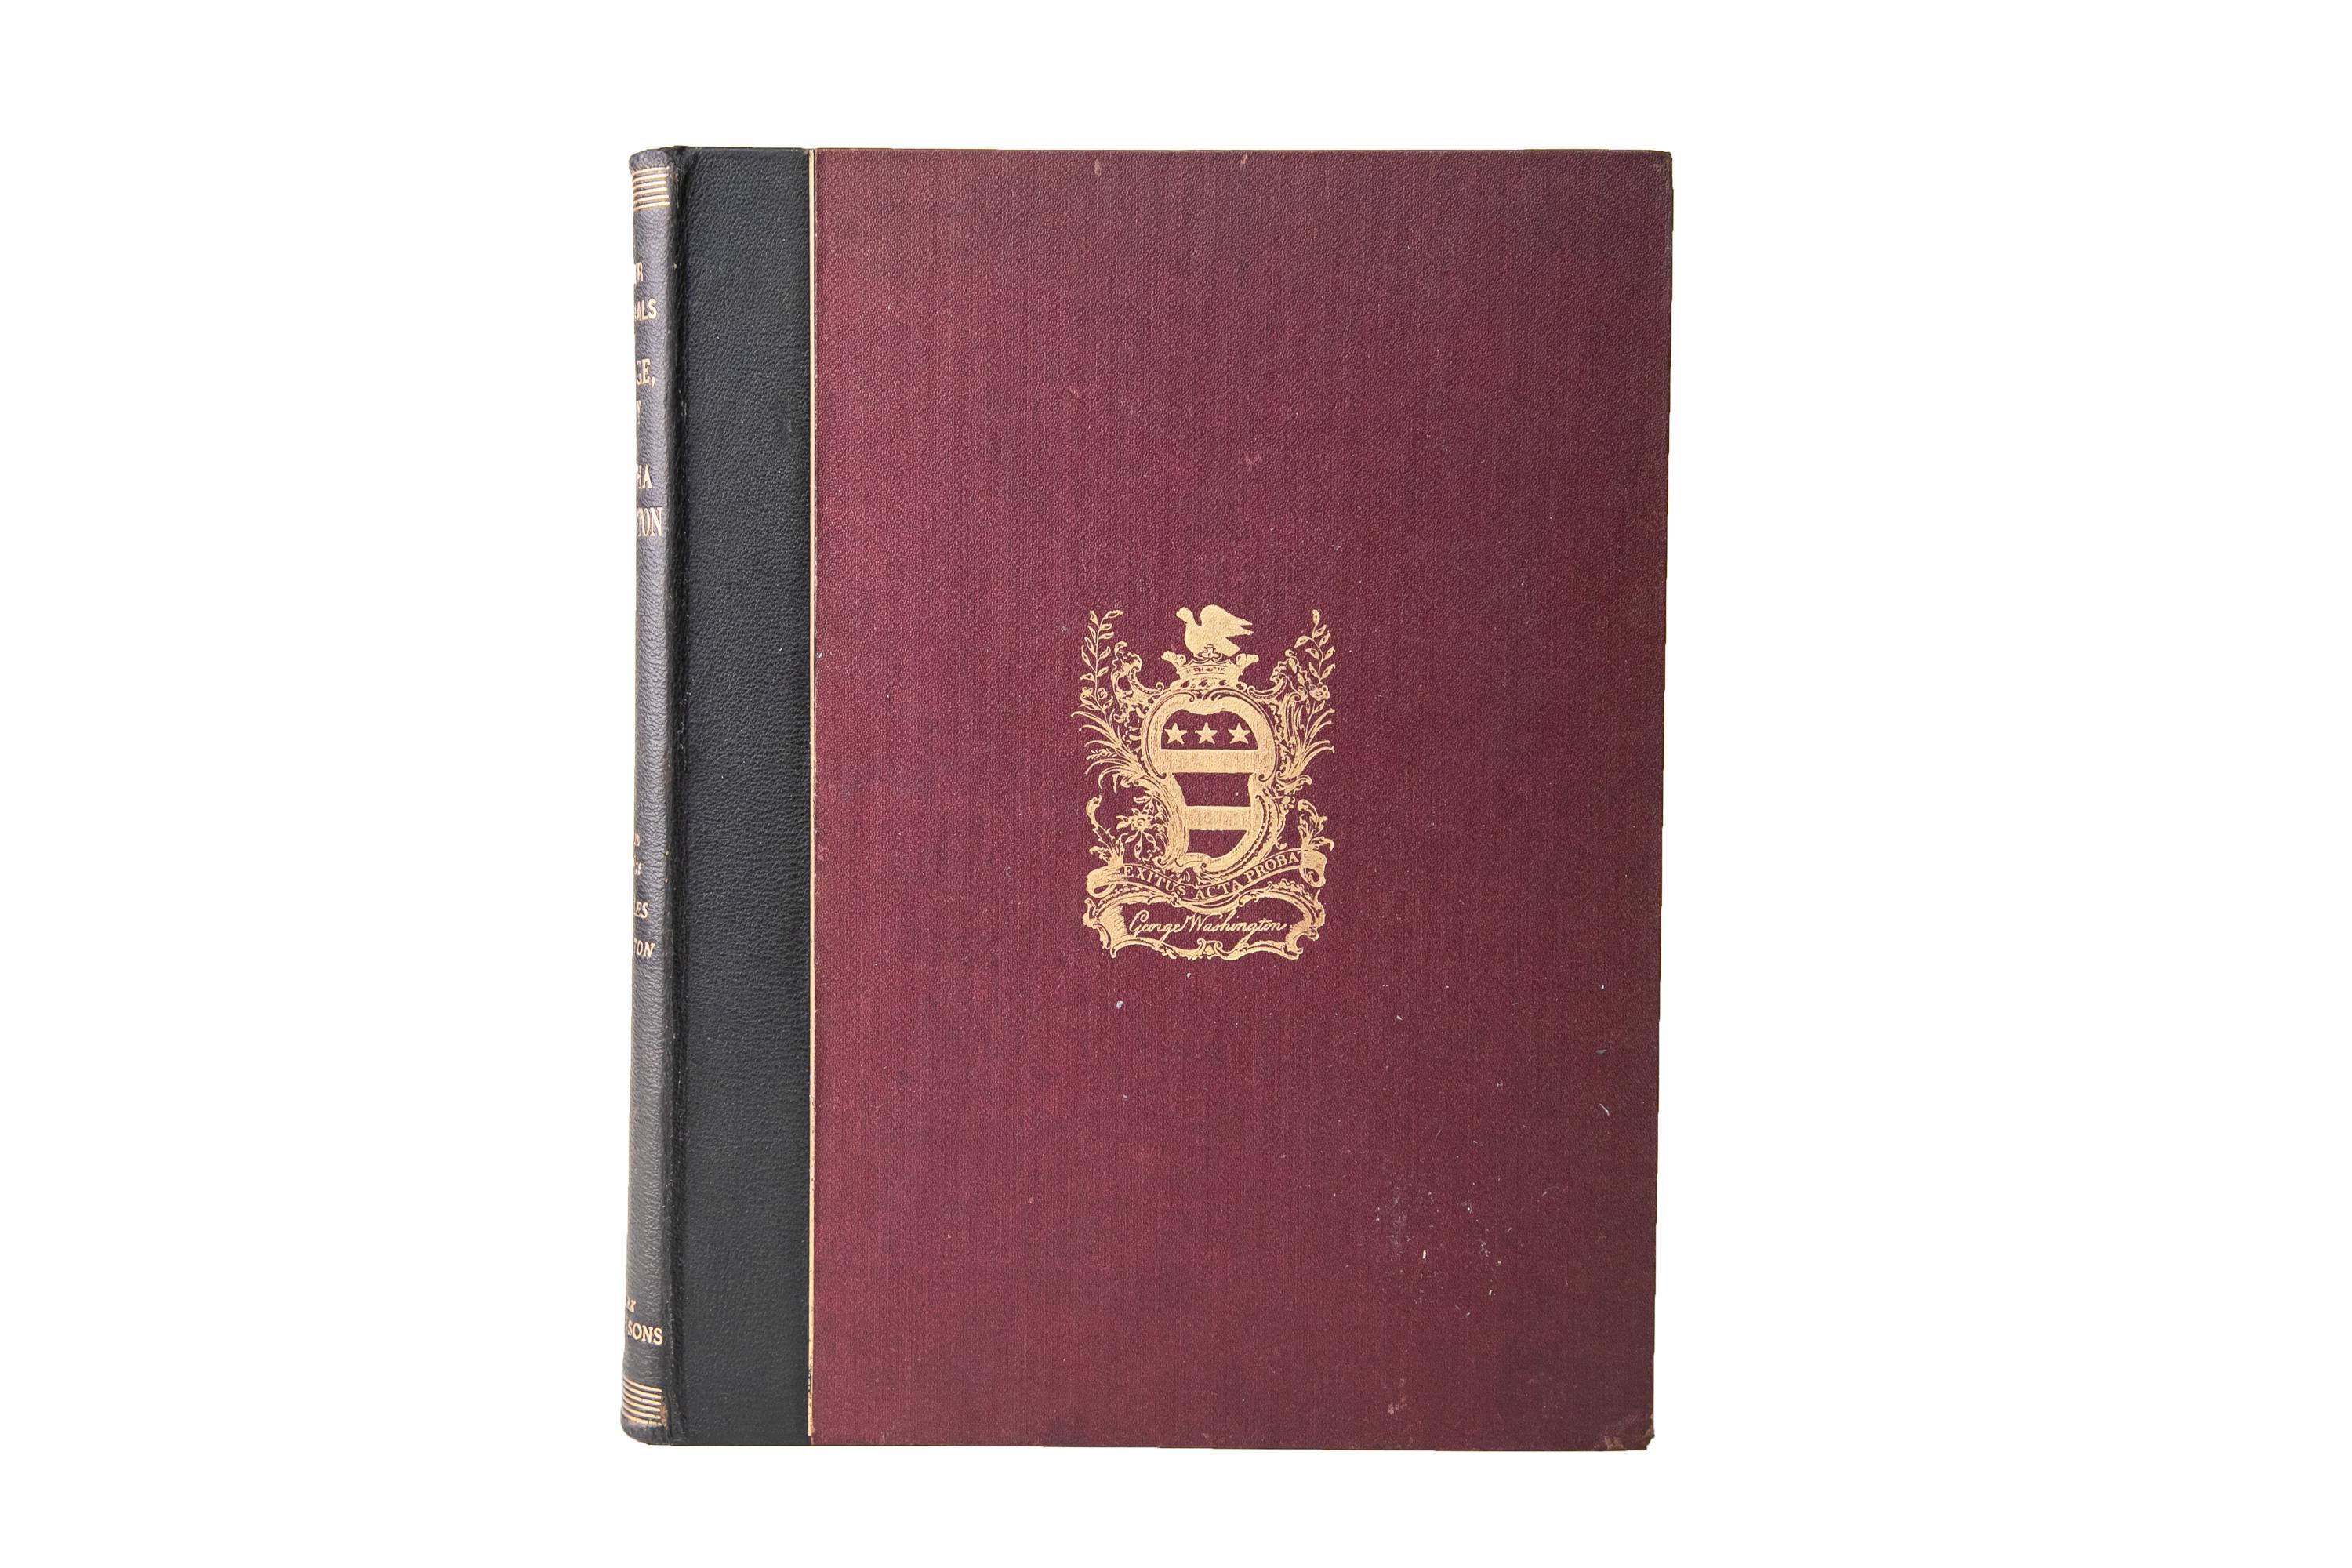 1 Volume. James Walter, Memorials of Washington. Edition de Luxe. Bound in 3/4 green morocco and linen boards with a gilt-tooled crest on the cover. The spines display gilt-tooled lettering. The top edge is gilded. Illustrated with portraits of